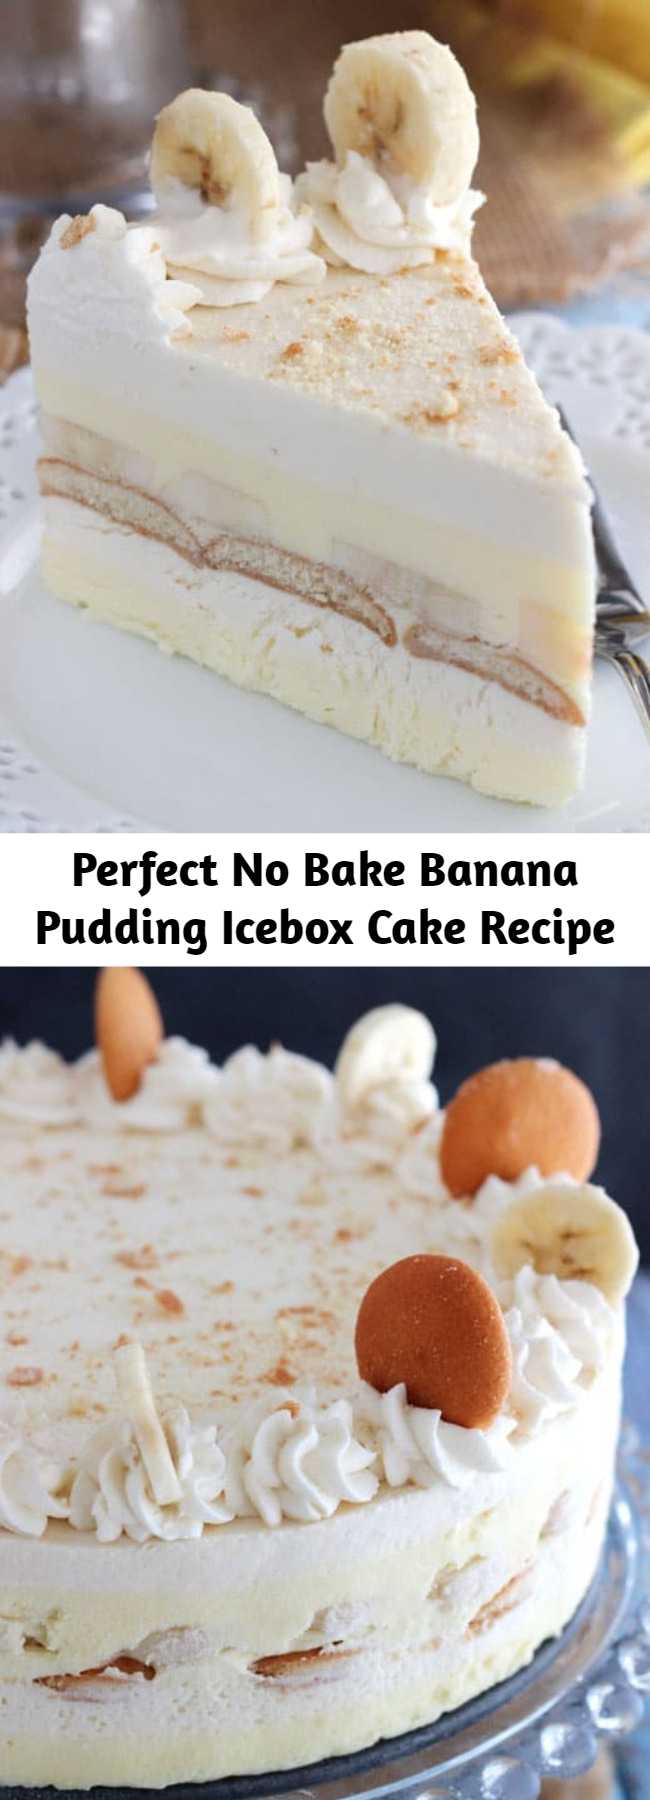 Perfect No Bake Banana Pudding Icebox Cake Recipe - This Banana Pudding Icebox Cake is the perfect no-bake dessert for summer. It’s a thicker, more fancy-looking version of banana pudding and it’s absolutely delicious!